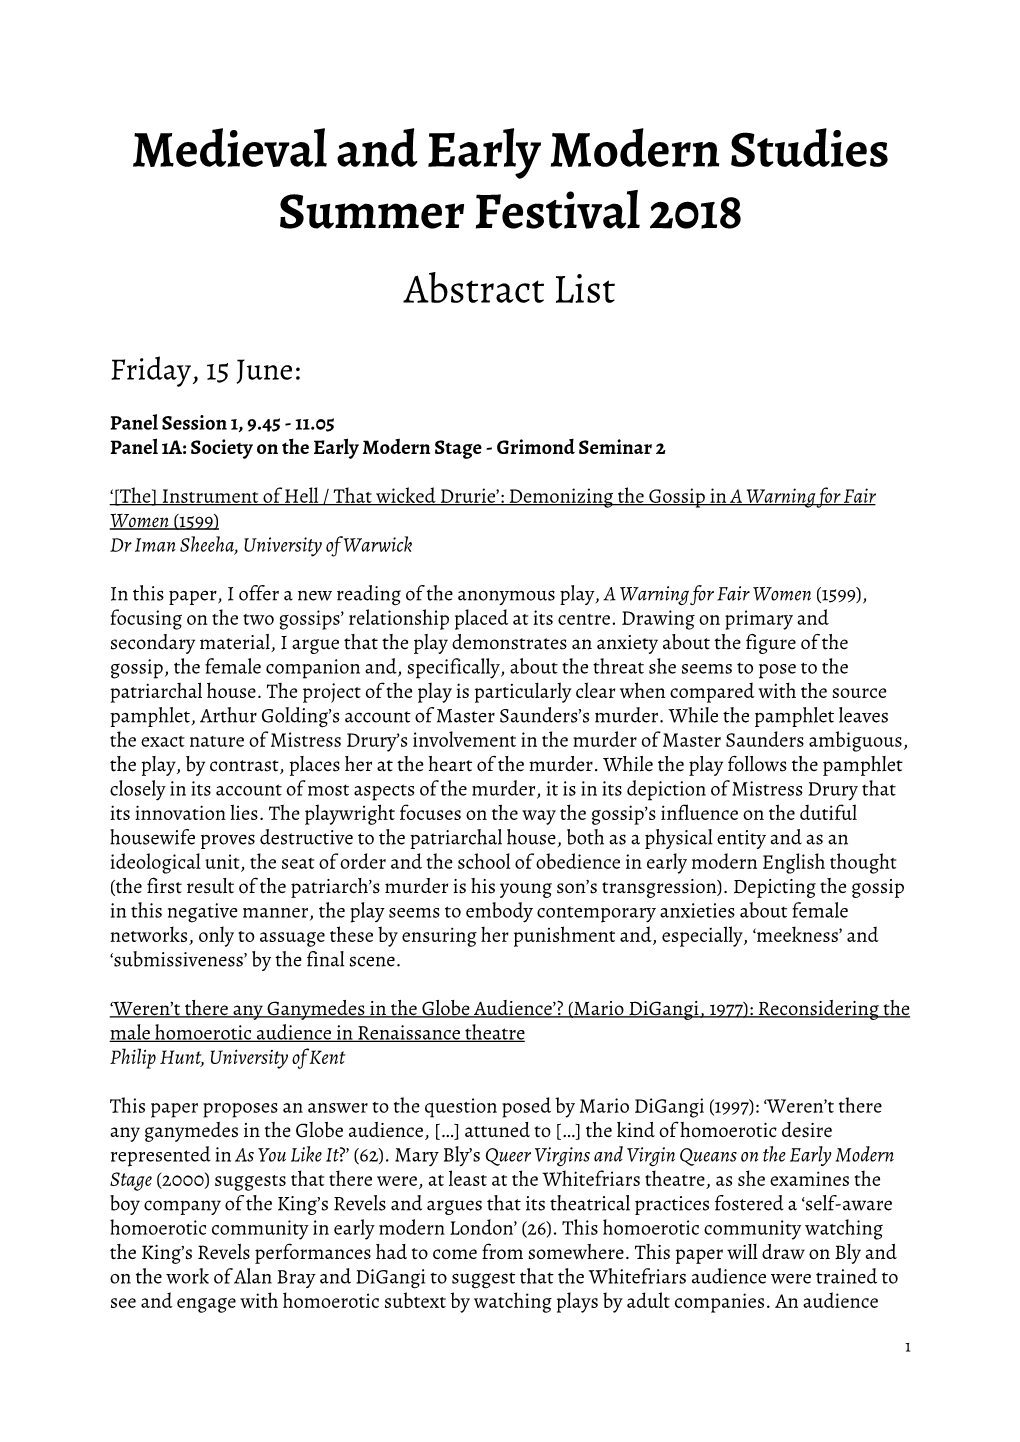 Medieval and Early Modern Studies Summer Festival 2018